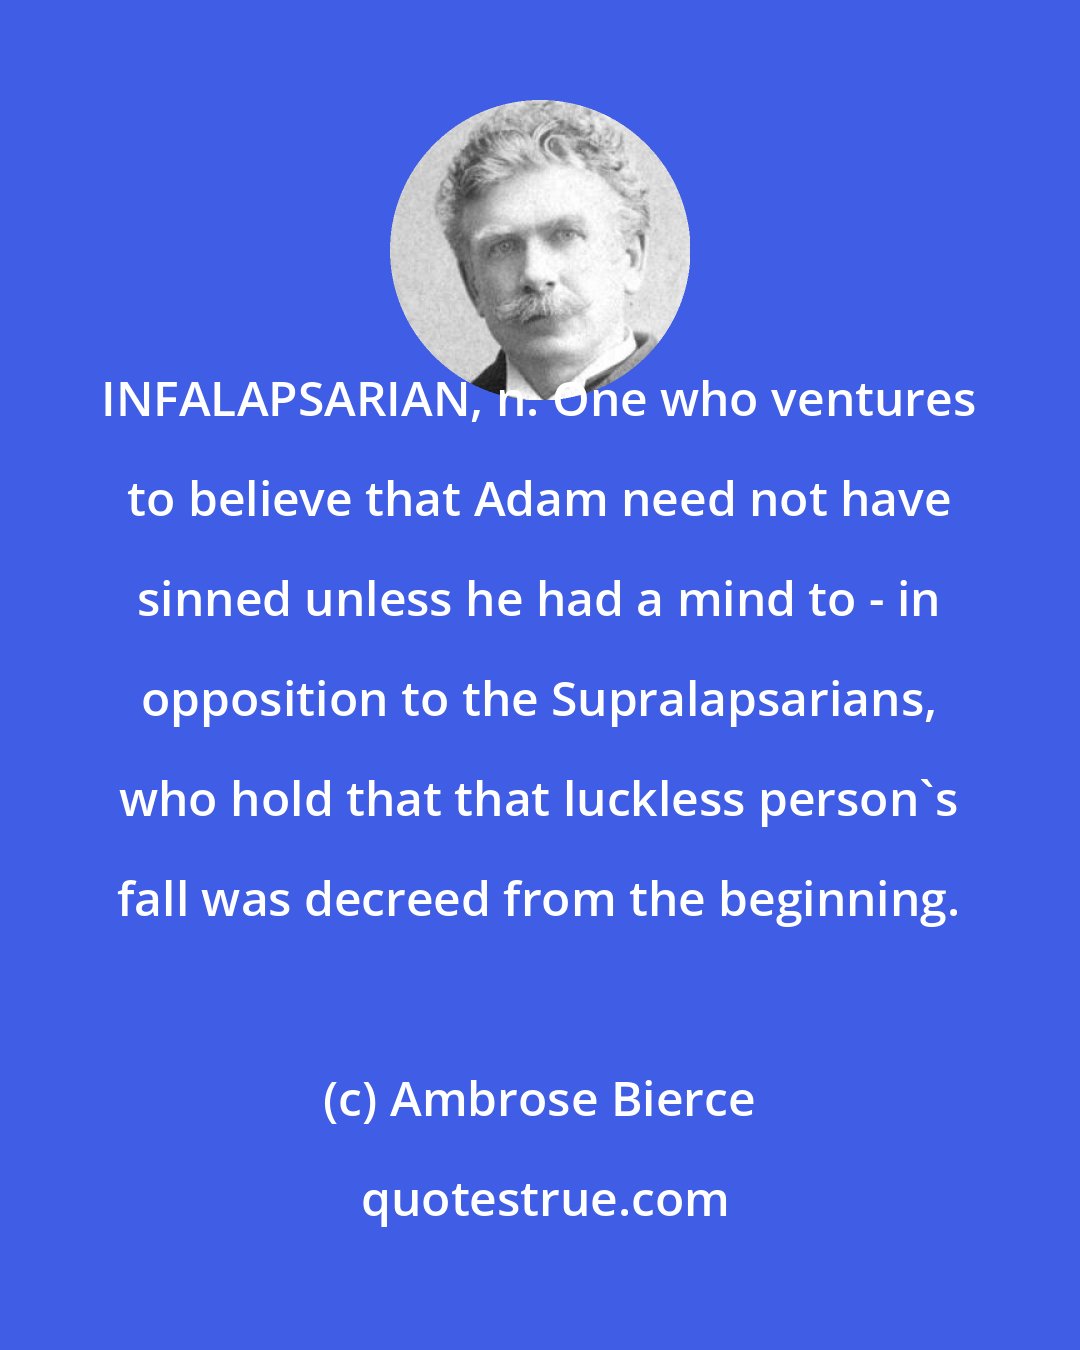 Ambrose Bierce: INFALAPSARIAN, n. One who ventures to believe that Adam need not have sinned unless he had a mind to - in opposition to the Supralapsarians, who hold that that luckless person's fall was decreed from the beginning.